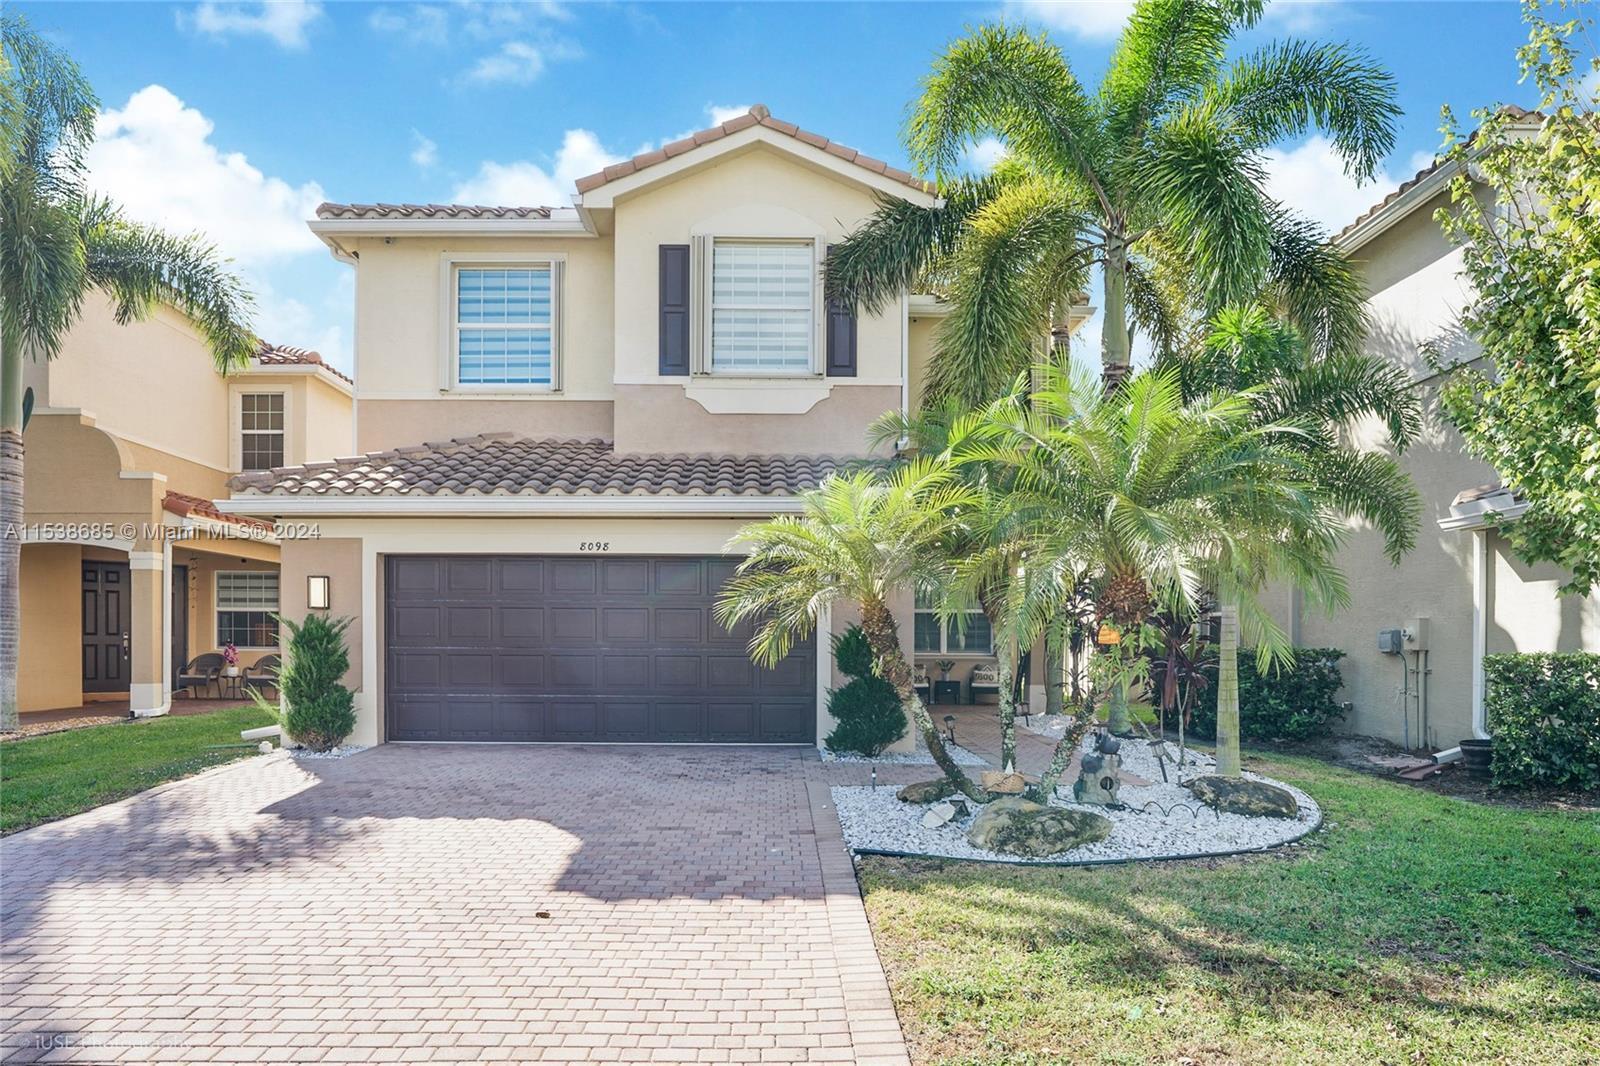 Updated asking price Look at this DREAM Home Awaits you, in Sunny South Florida! Escape to paradise 